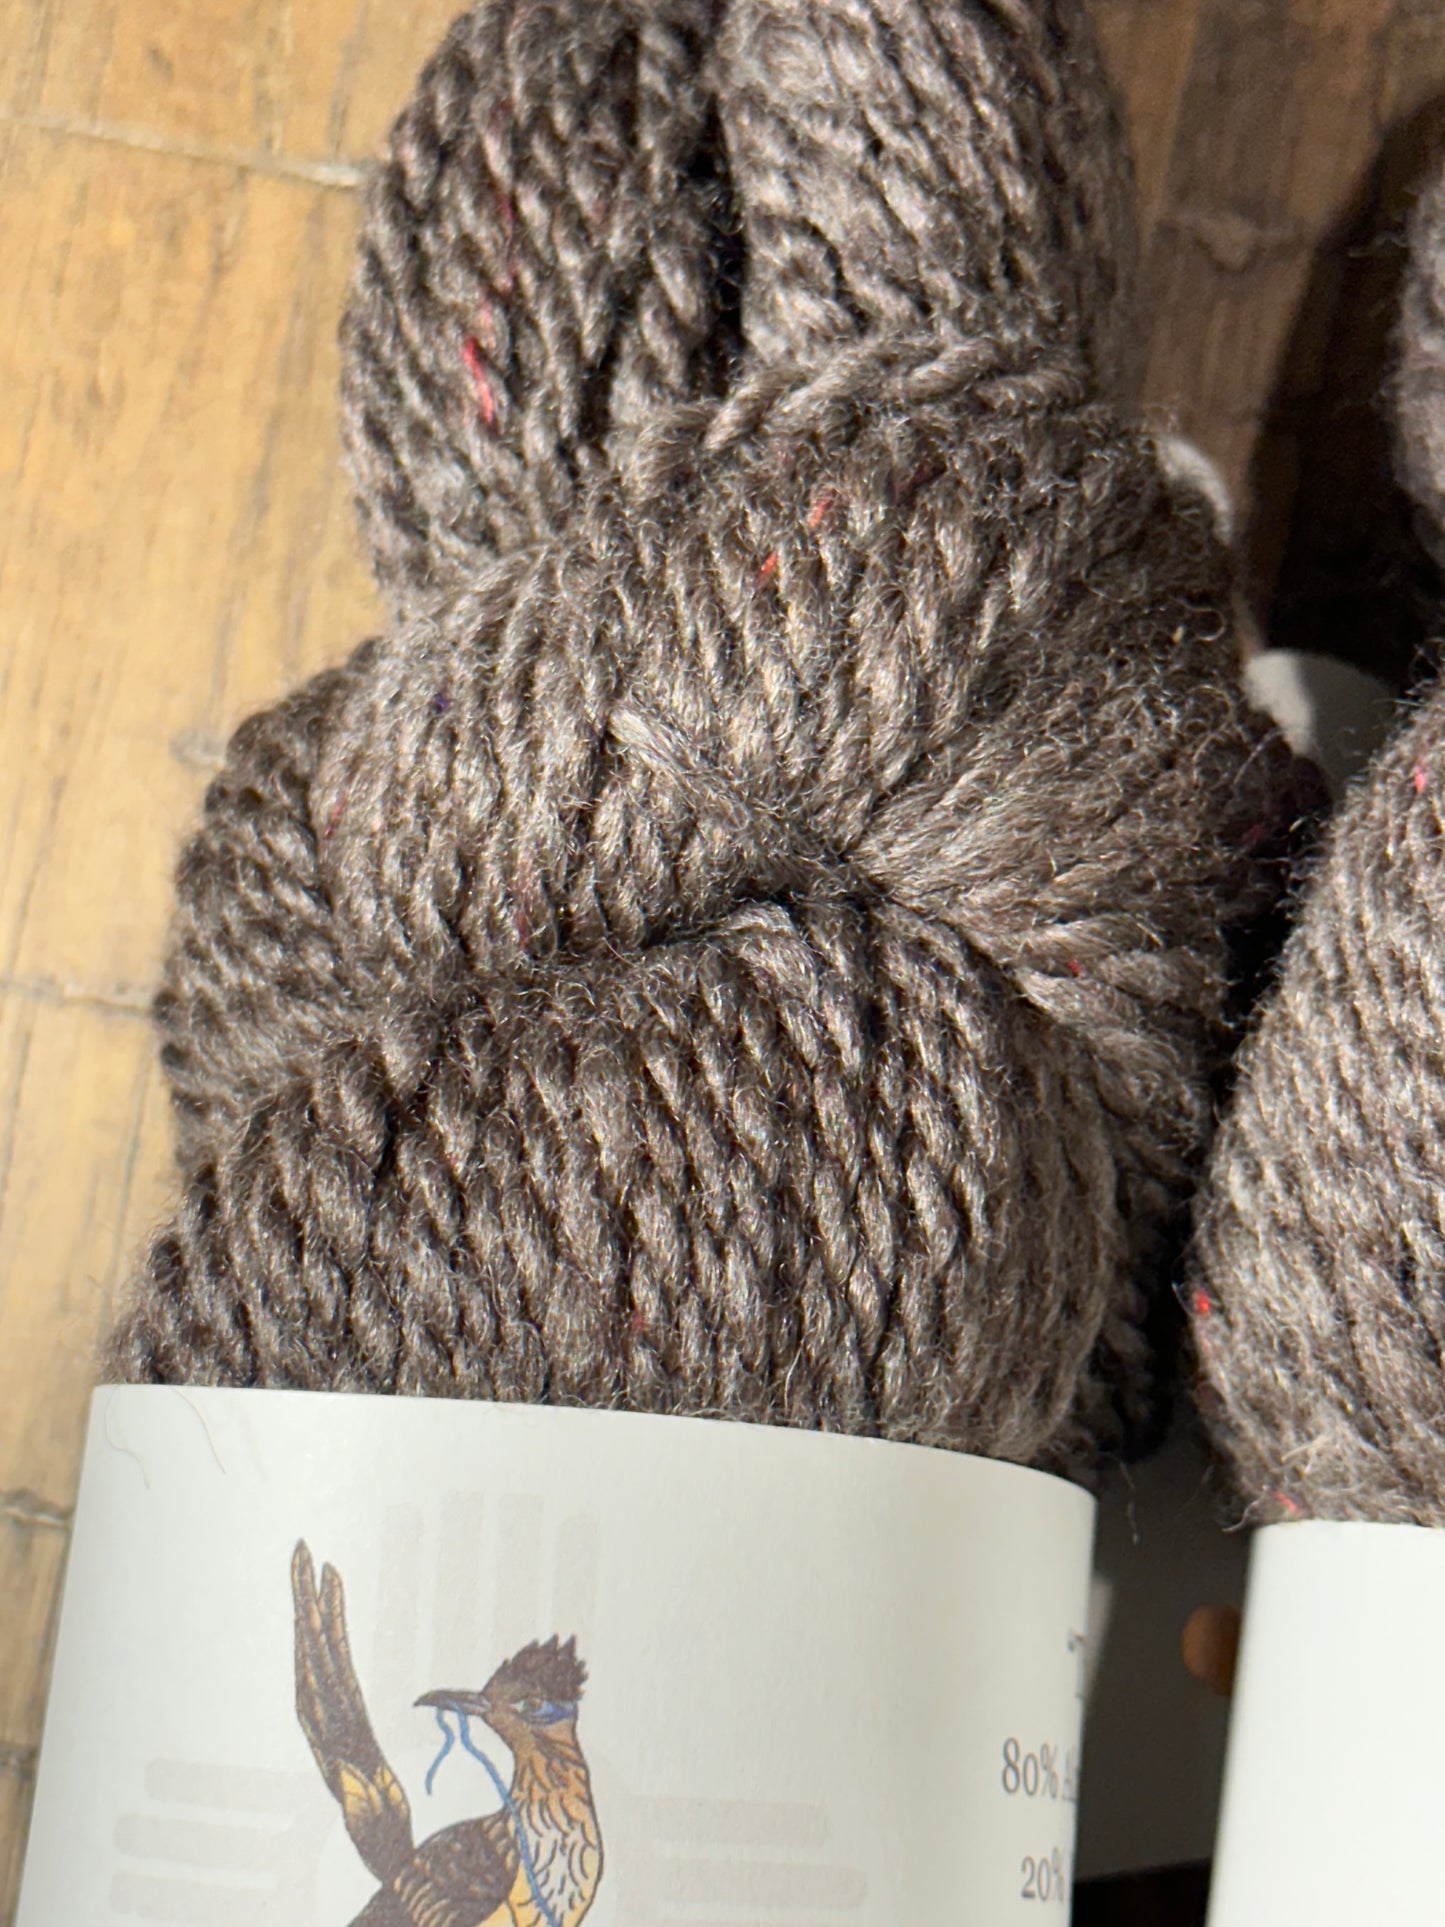 yarn-worsted Weight-Thorn